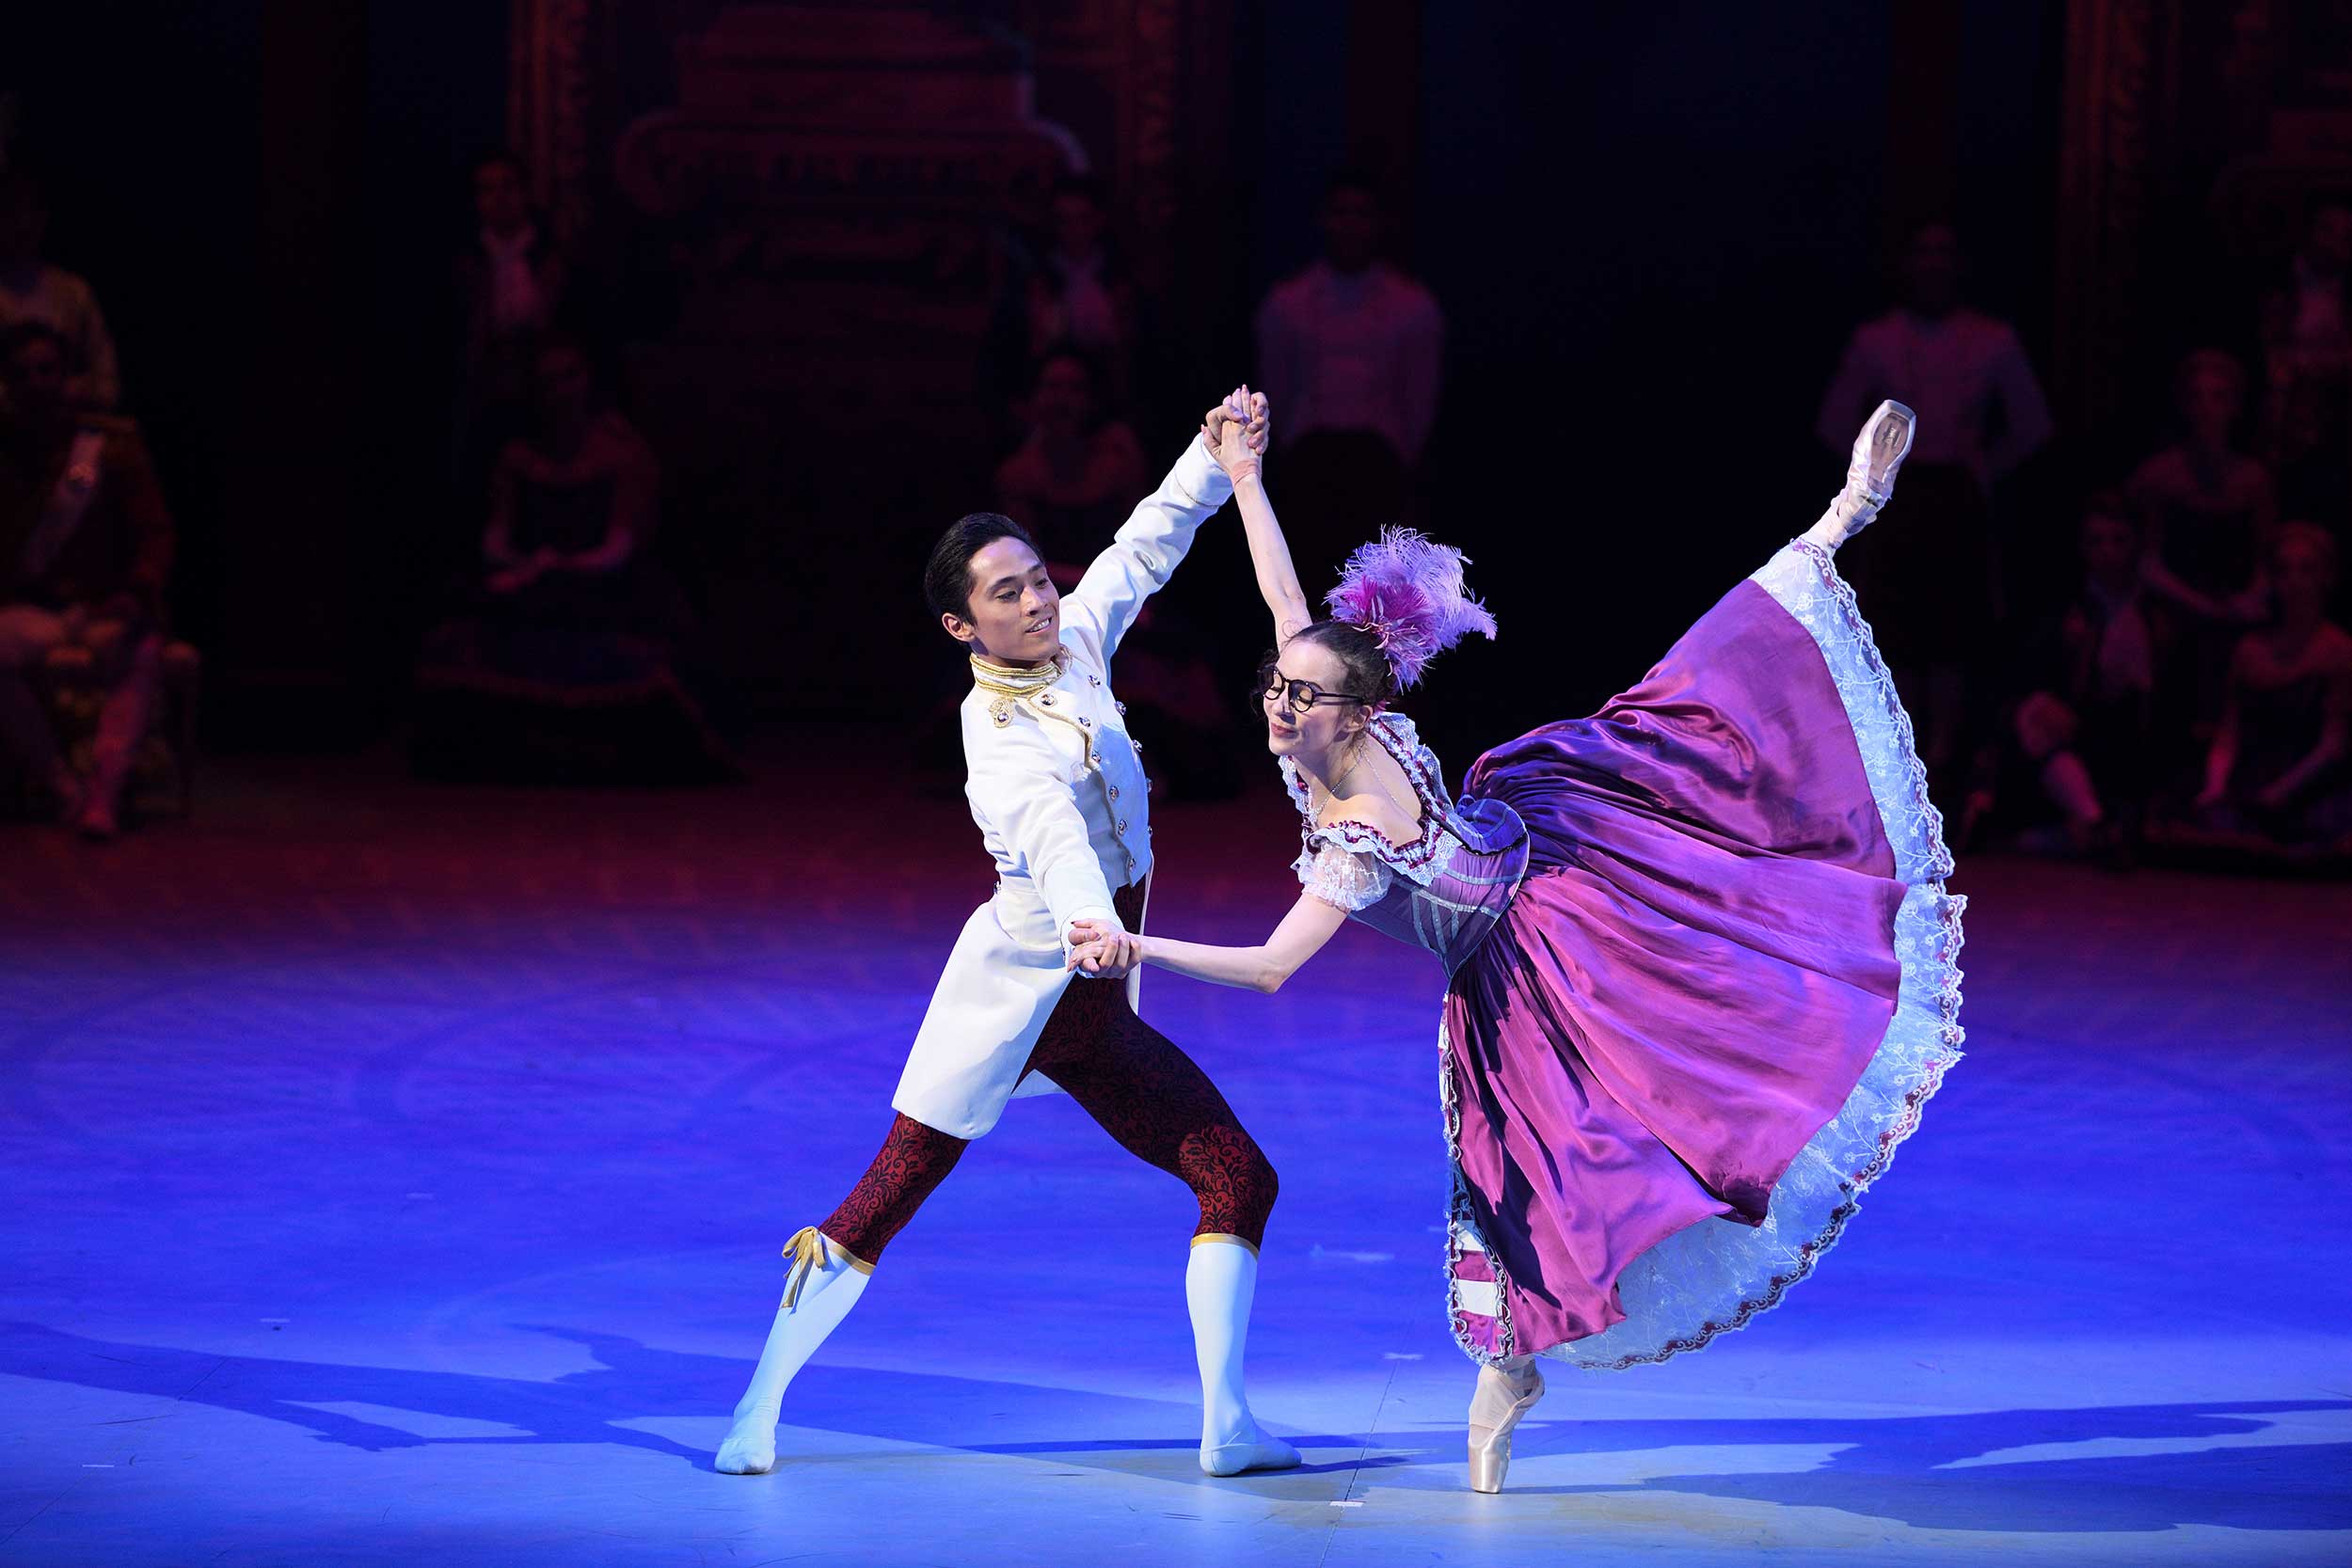 Cinderella in-the-round: Benjamin and Clementine pas de deux (extract) | English National Ballet